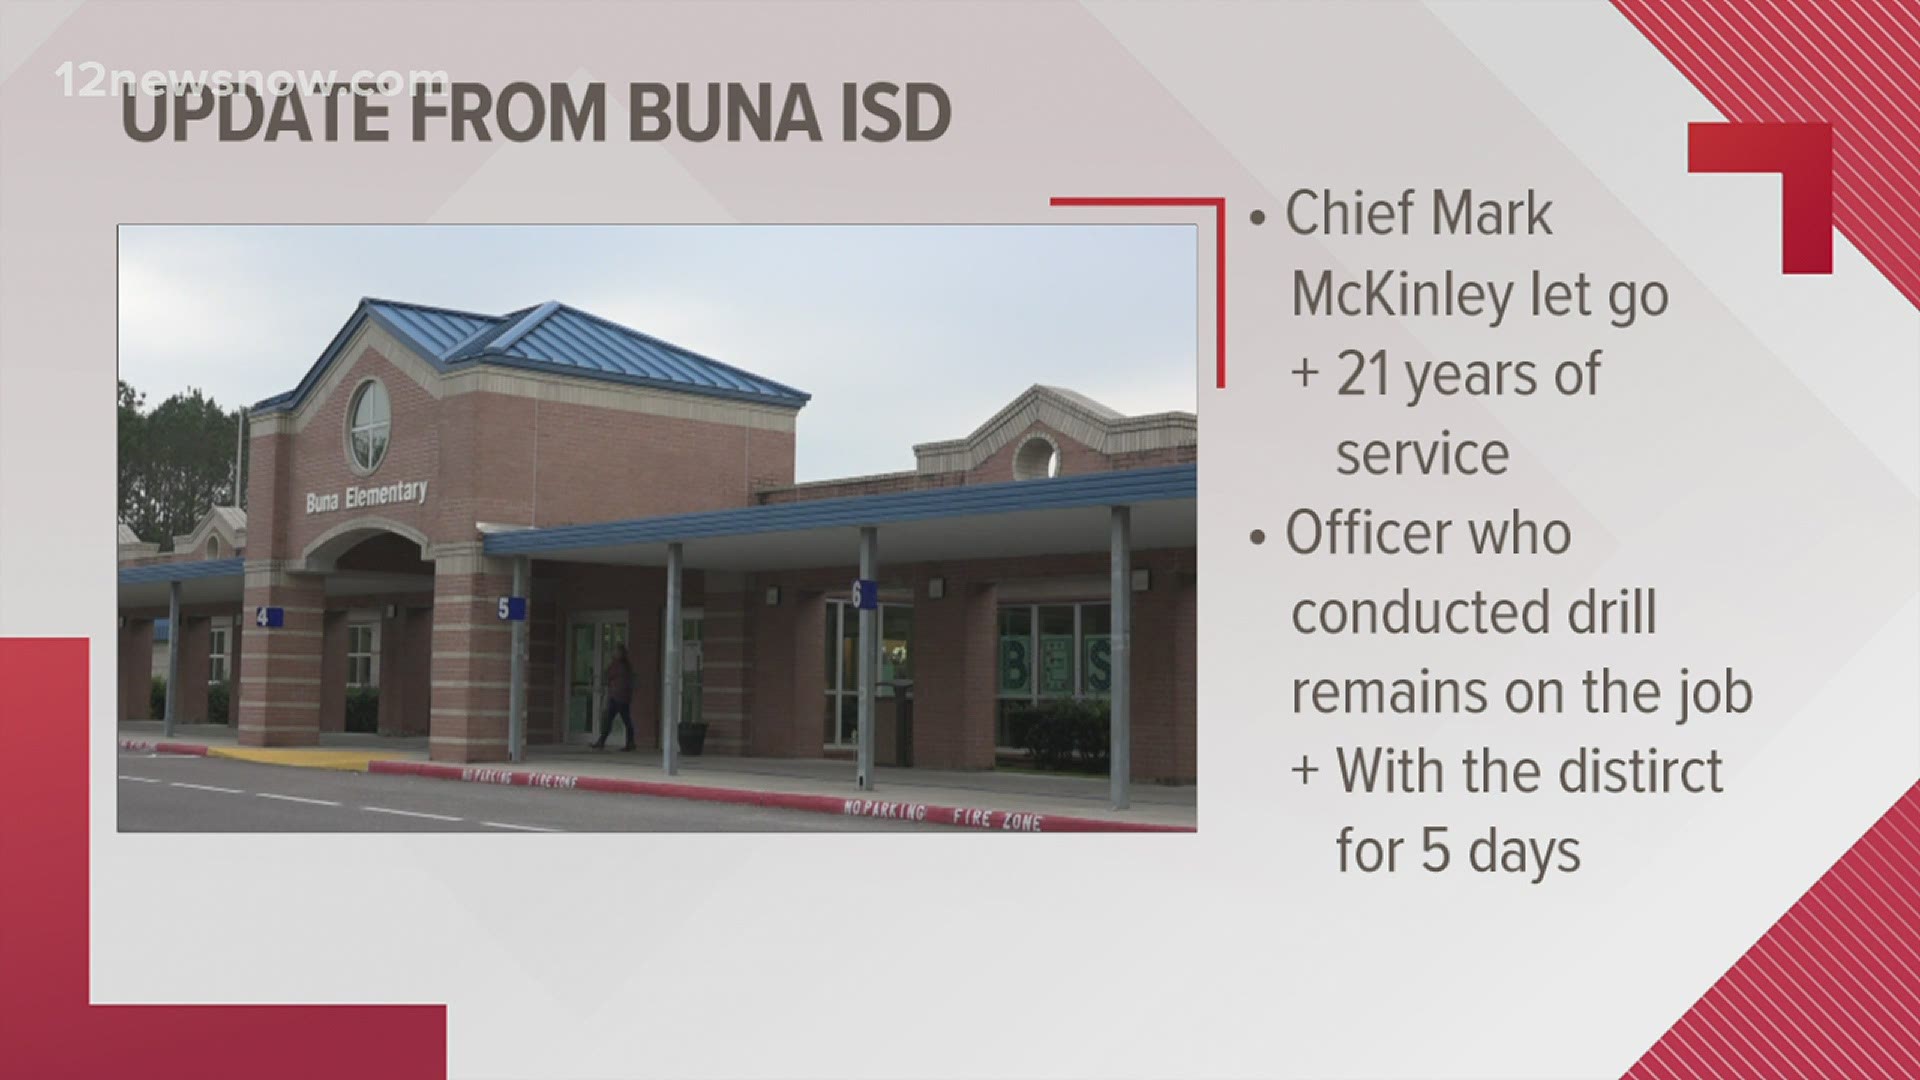 The departure came two days after a drill when Buna ISD's security officer disguised as an intruder showed up at Buna Elementary for an unannounced safety drill.